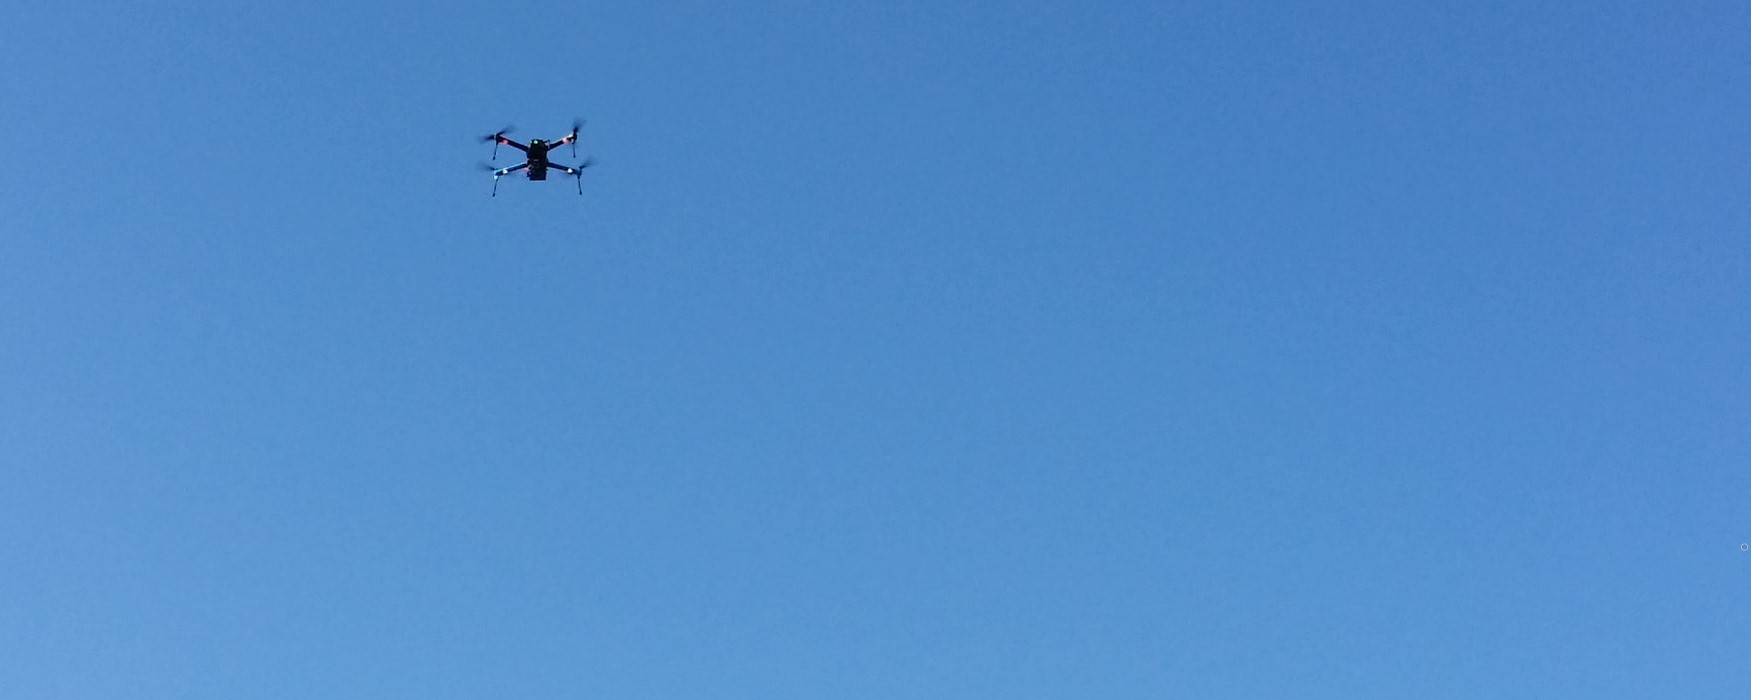 A drone flying in the sky